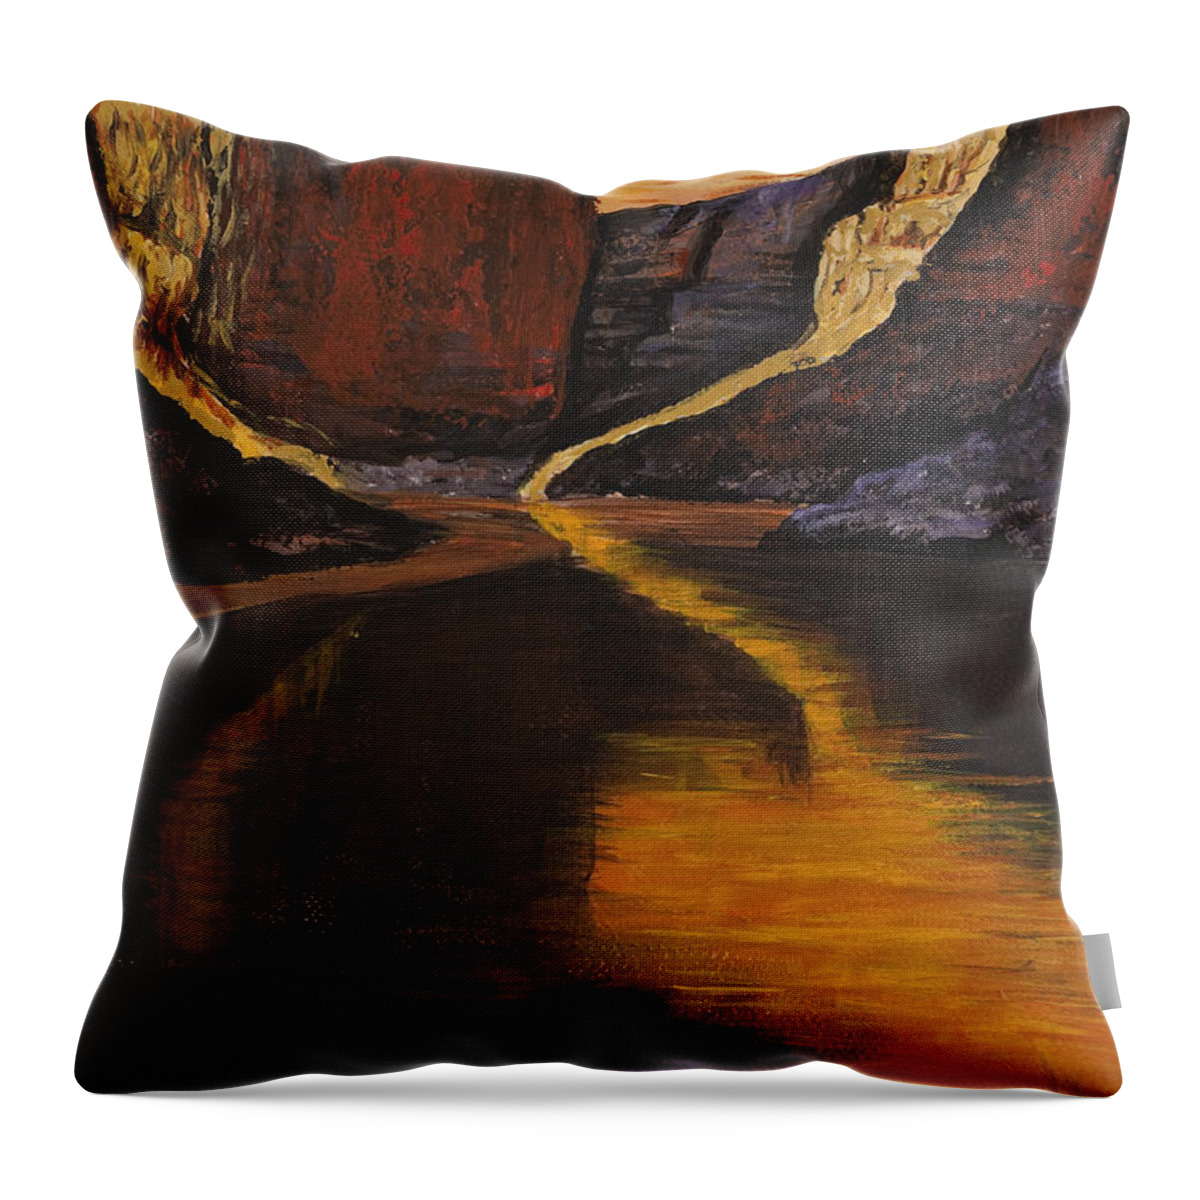 Landscape Throw Pillow featuring the painting Through The Cracks by Darice Machel McGuire